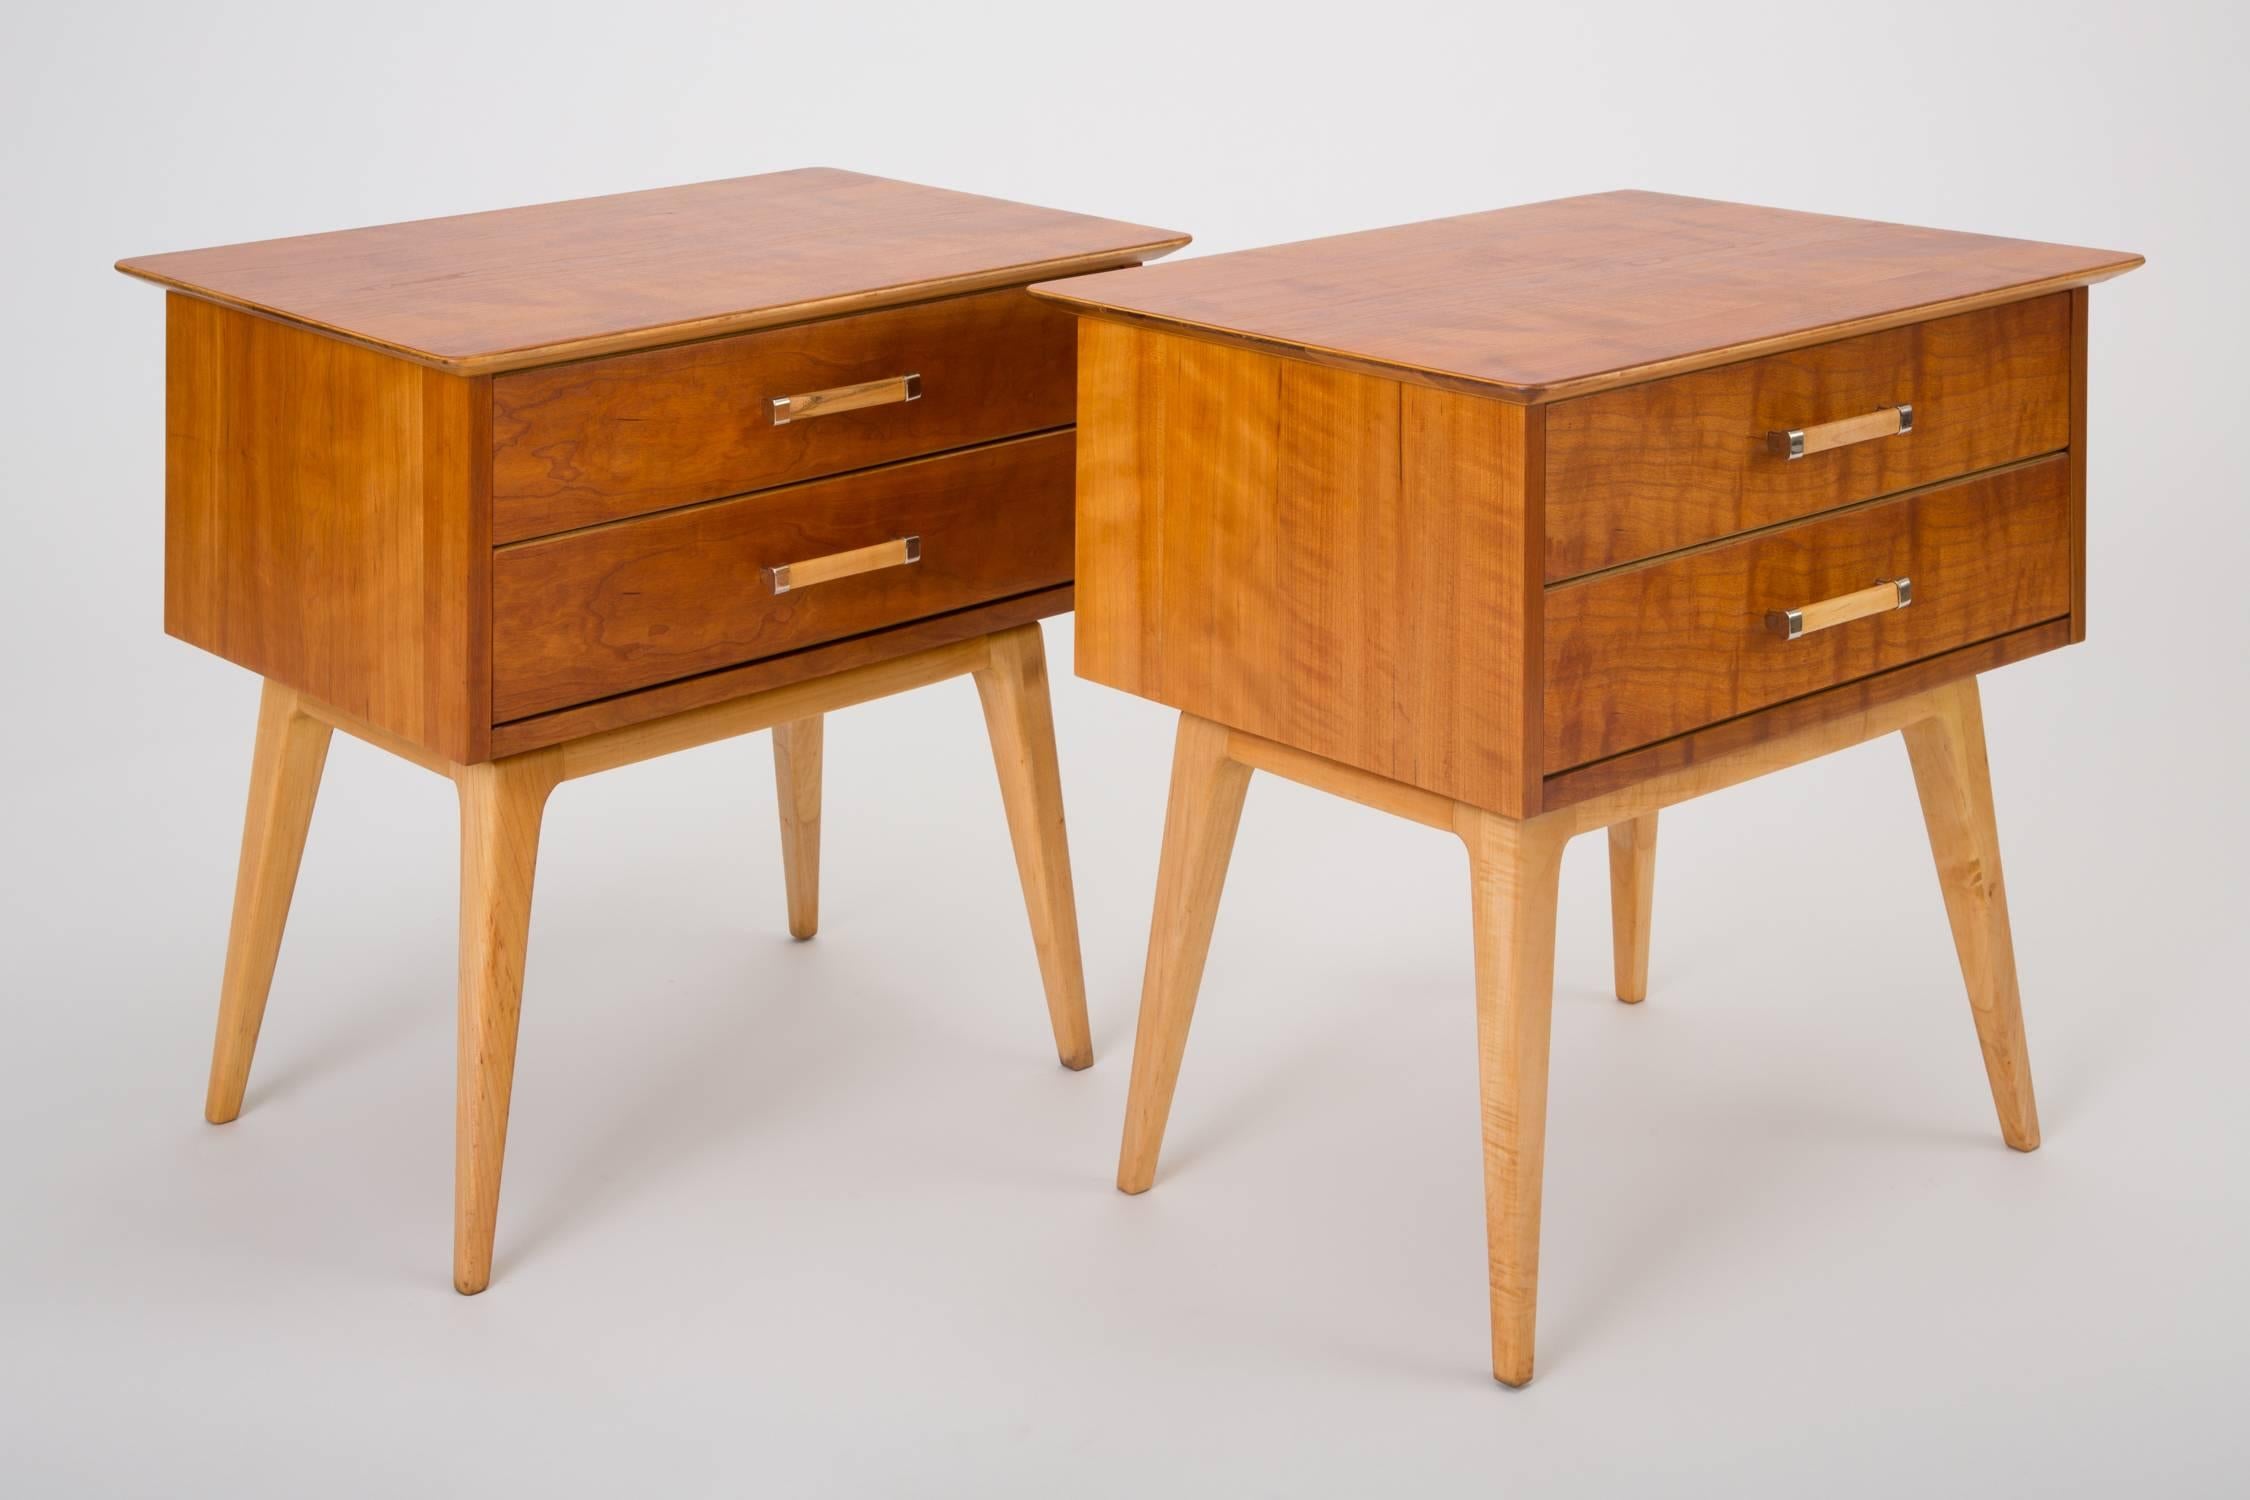 A stately pair of modern nightstands in subtly figured curly cherrywood with contrasting birch accents and brass fittings. Designed in the early 1950s for Johnson Furniture by longstanding creative director Renzo Rutili, and retailed by John Stuart